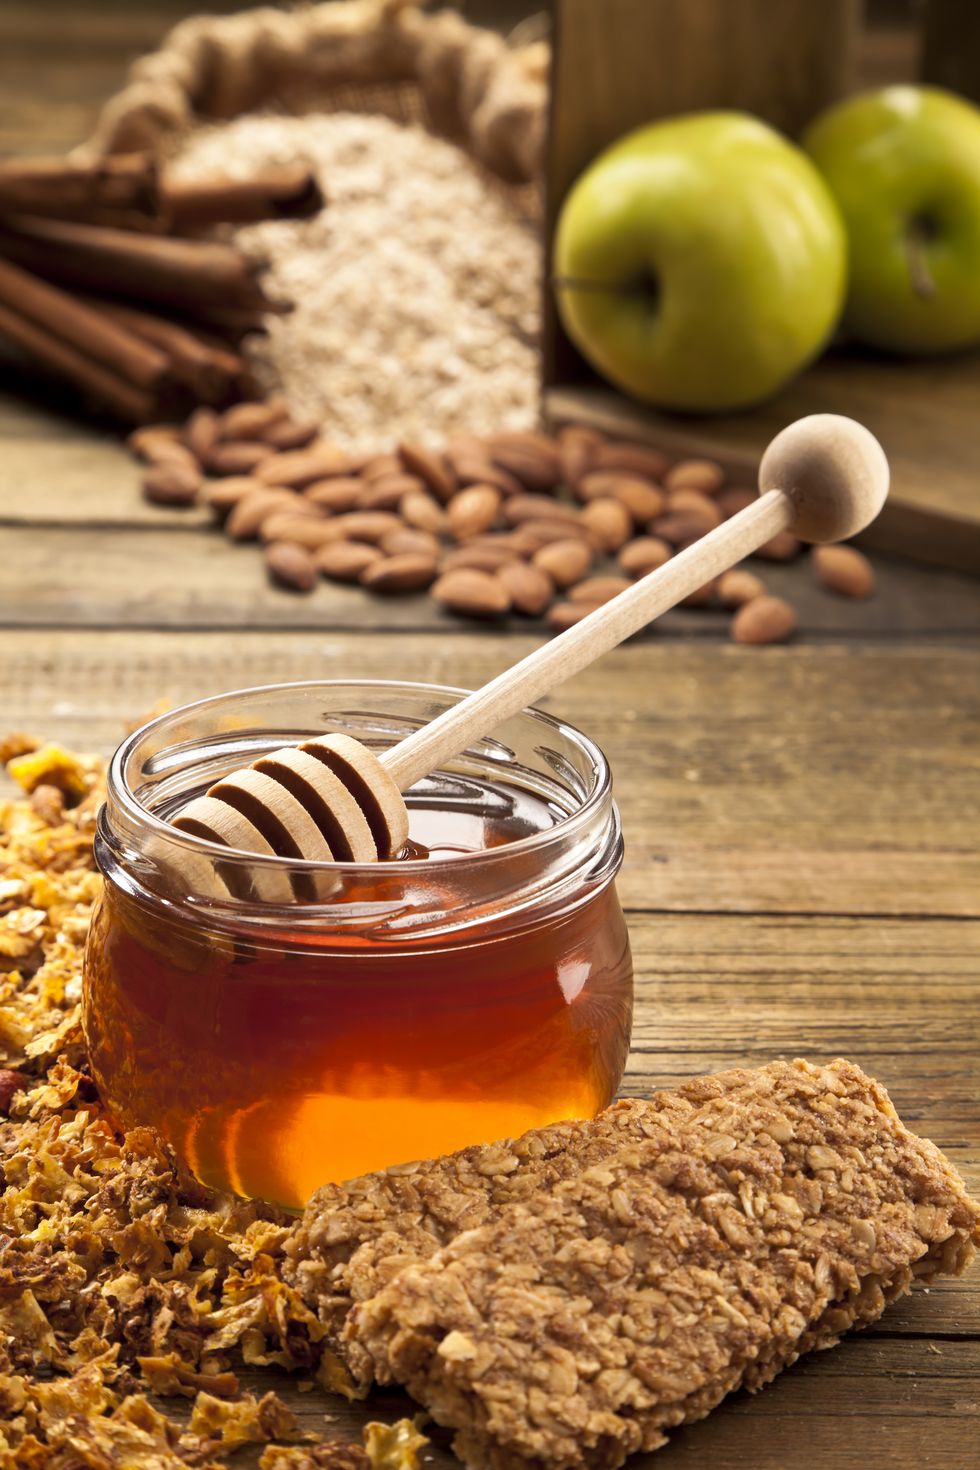 Honey Pot and Dipper with Green Apples, Oat, Cinnamon Sticks, Almonds and Granola Bar. RELATED PHOTOS ON MY PORTFOLIO